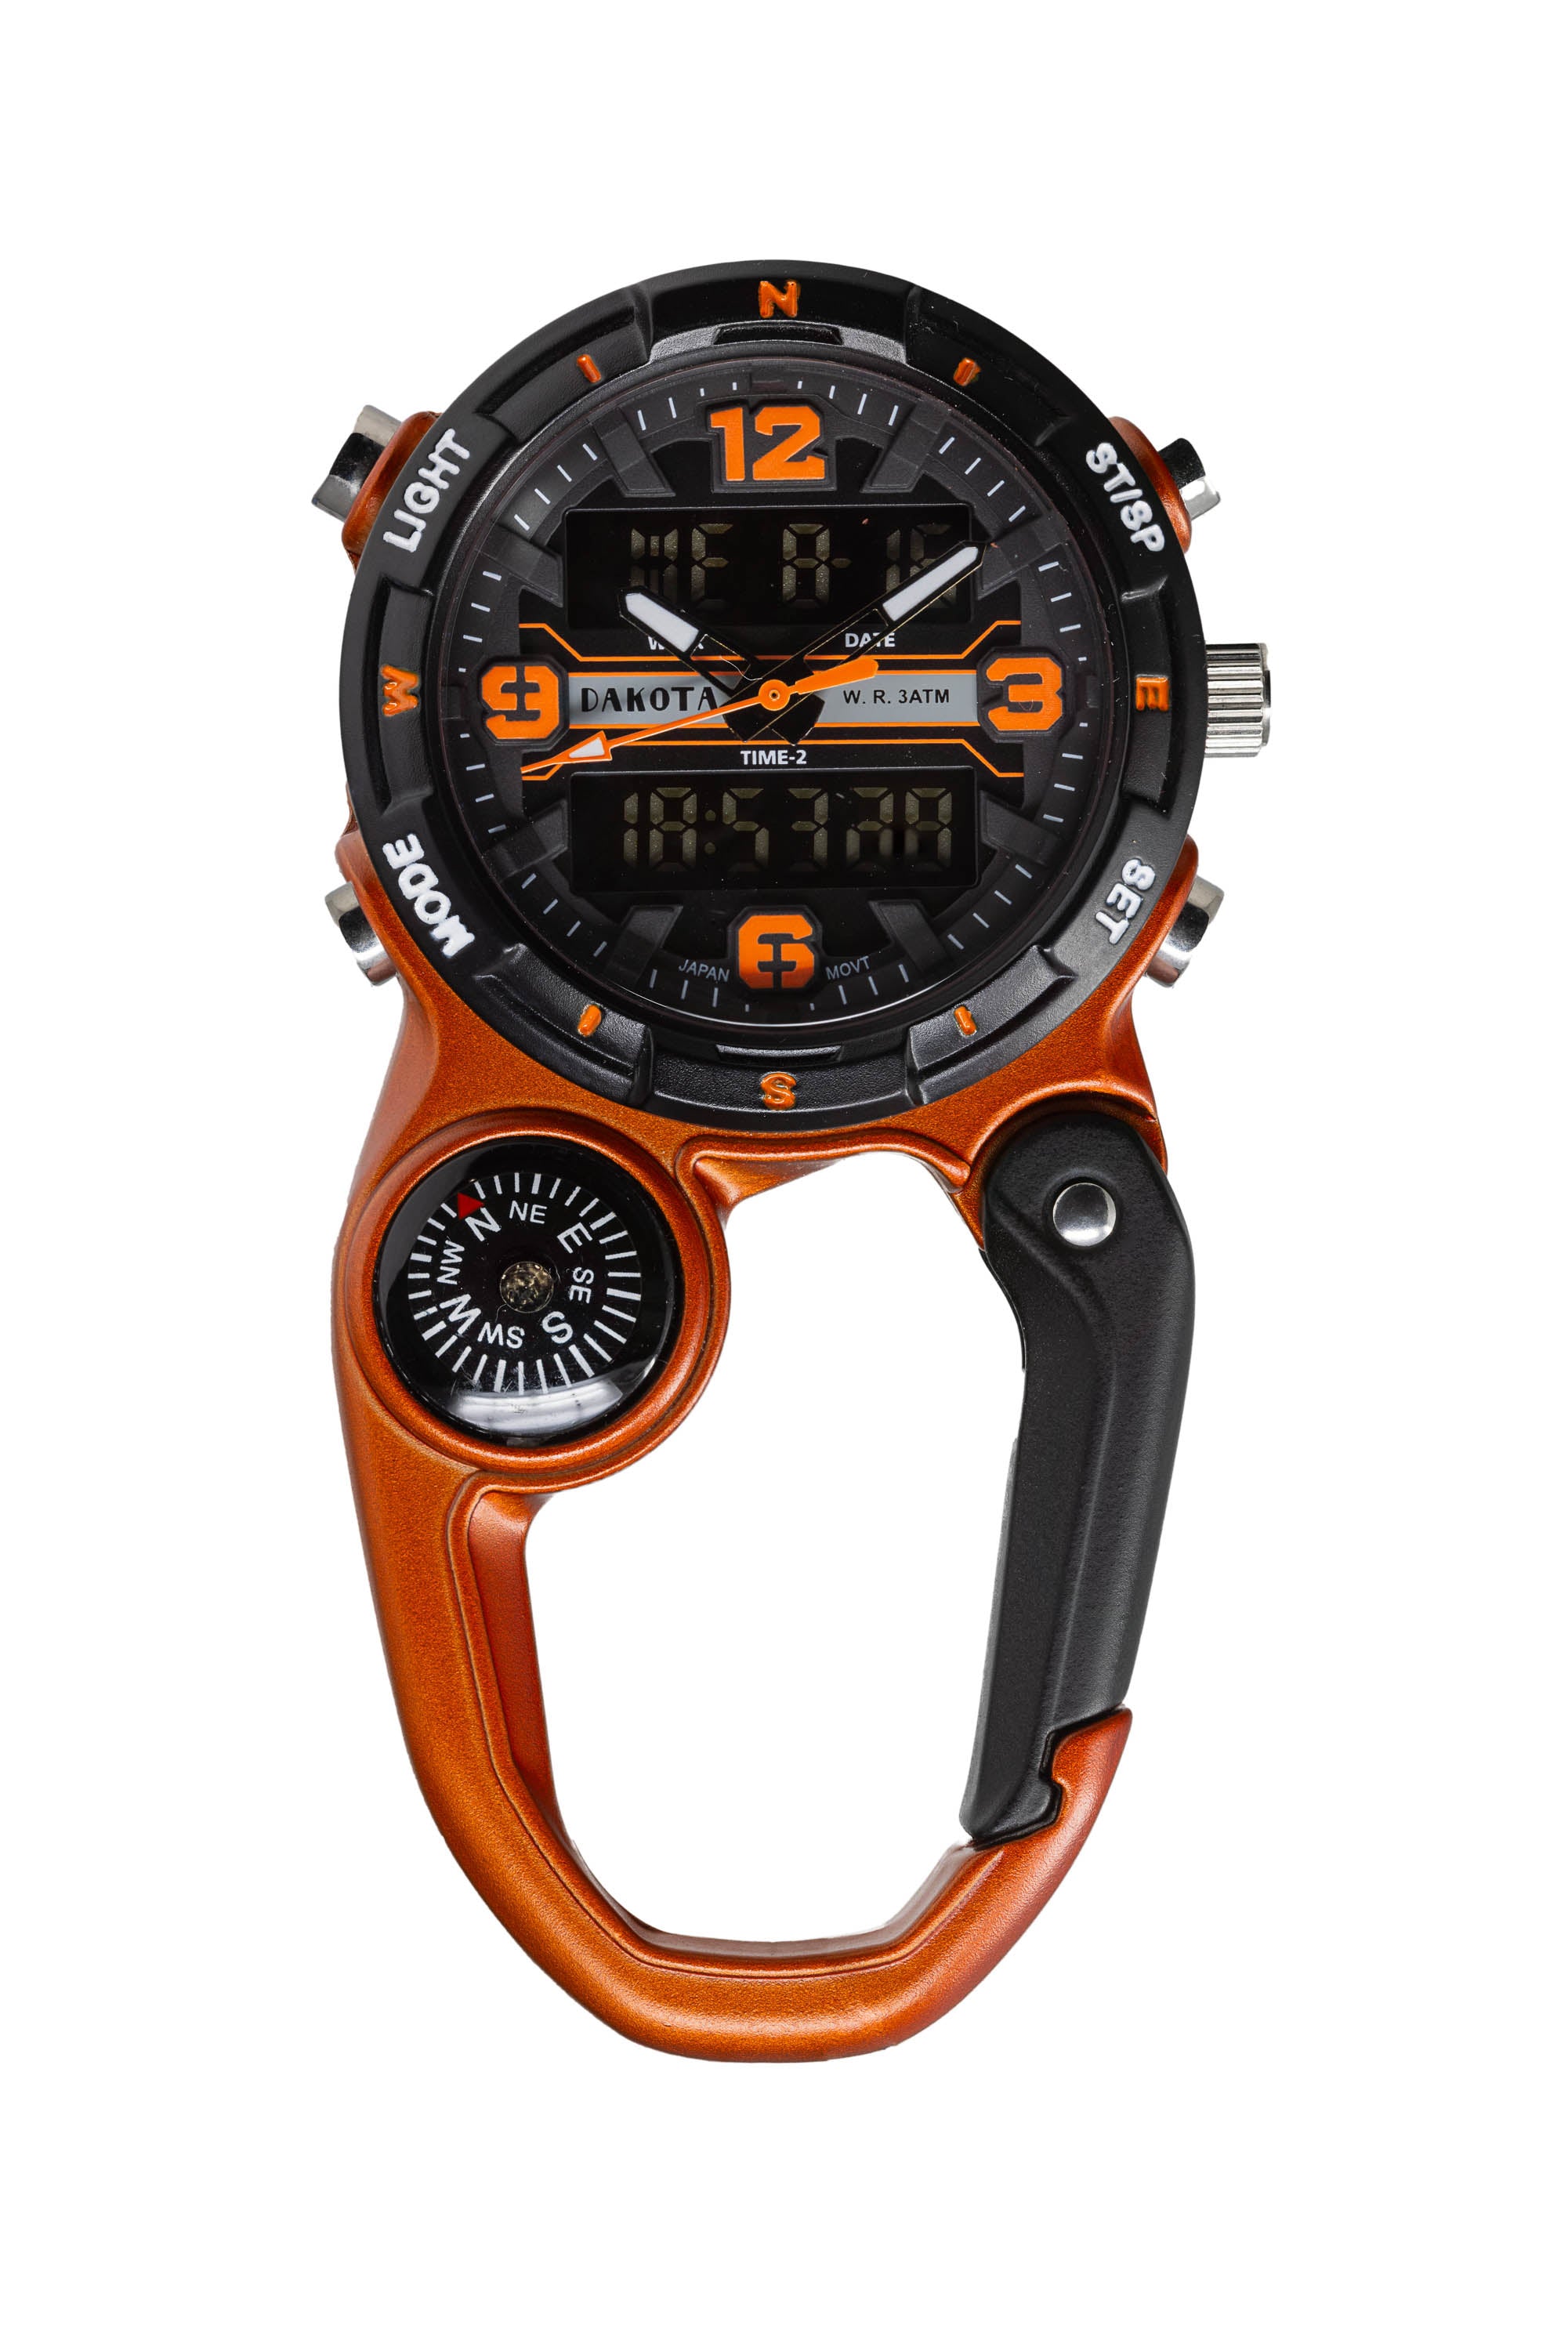 Dakota Watch Company - The New Dakota Q3! With 1000ft of water resistance  and a 10 year warranty! Best.Gift.Ever! Get yours: http://bit.ly/2h39UPe |  Facebook